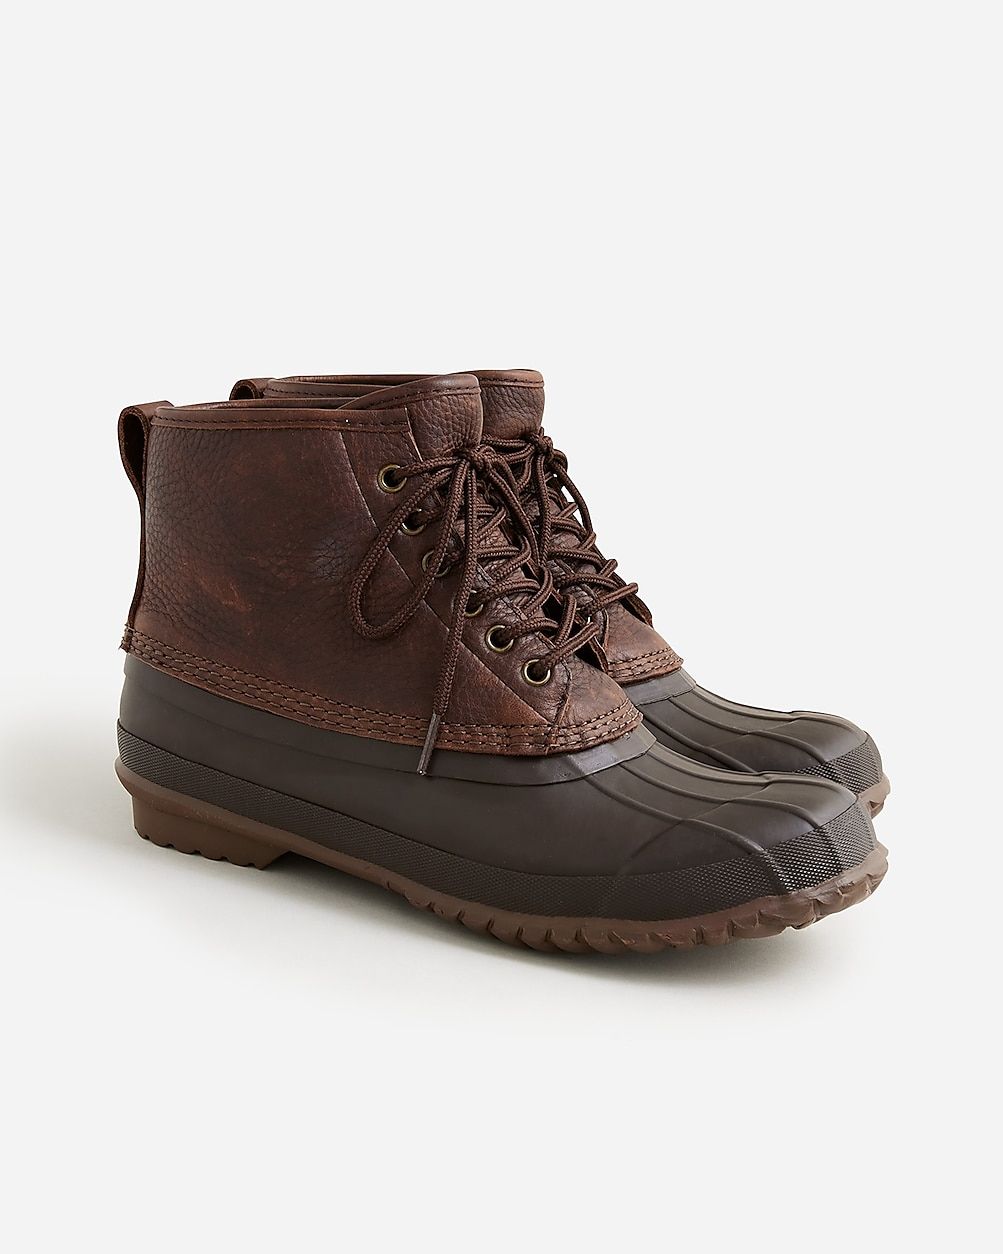 Heritage duck boots in tumbled leather | J.Crew US